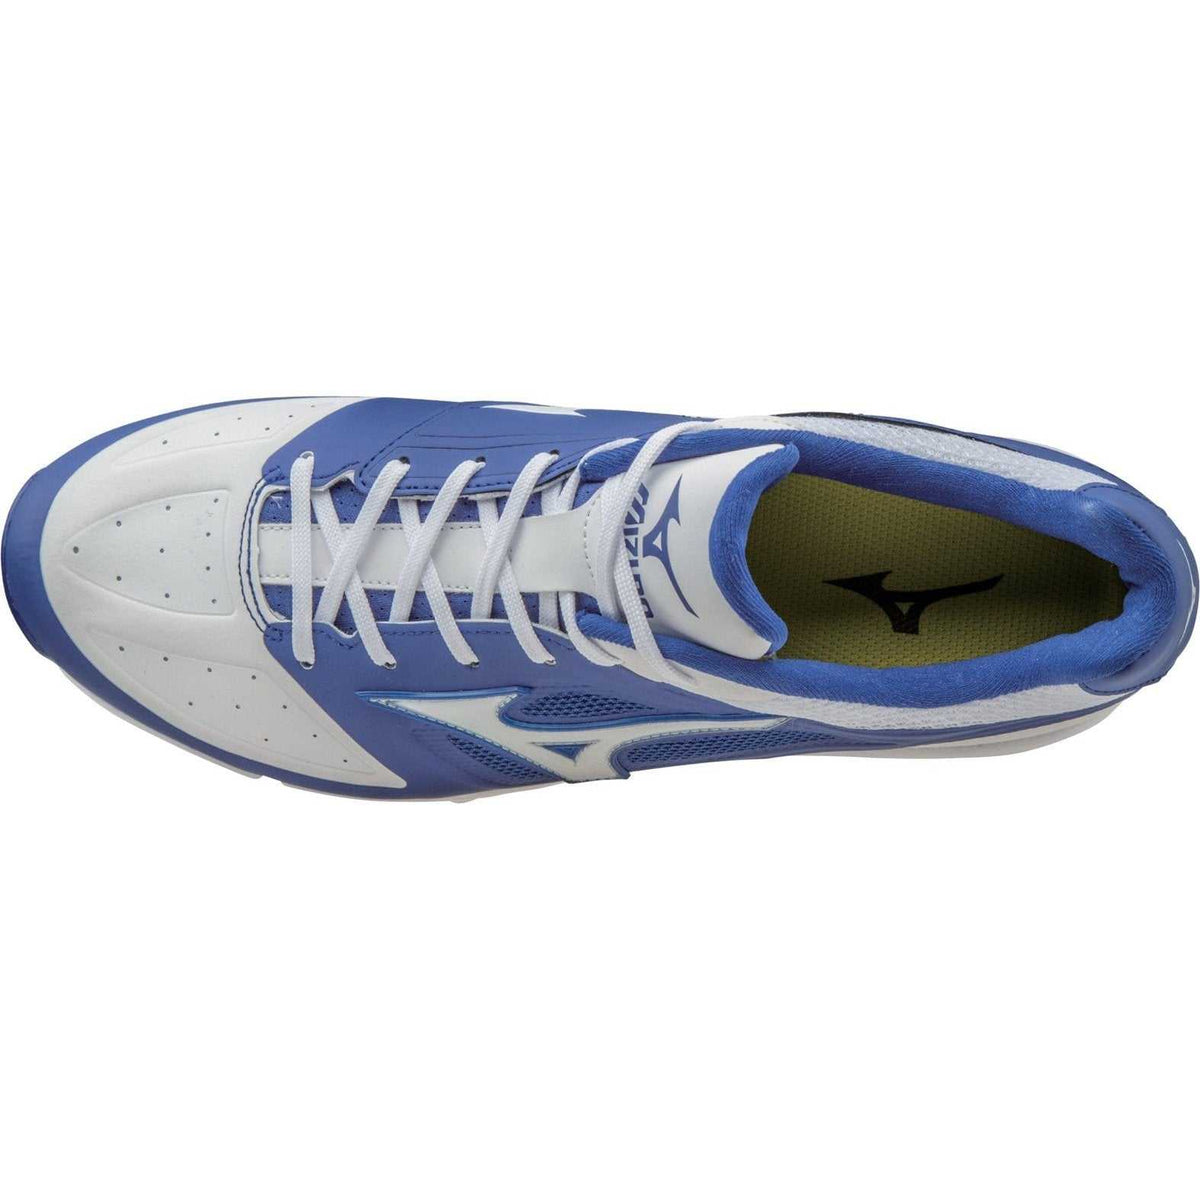 Mizuno 9-spike Advanced Sweep 3 Cleats - White Royal - HIT a Double